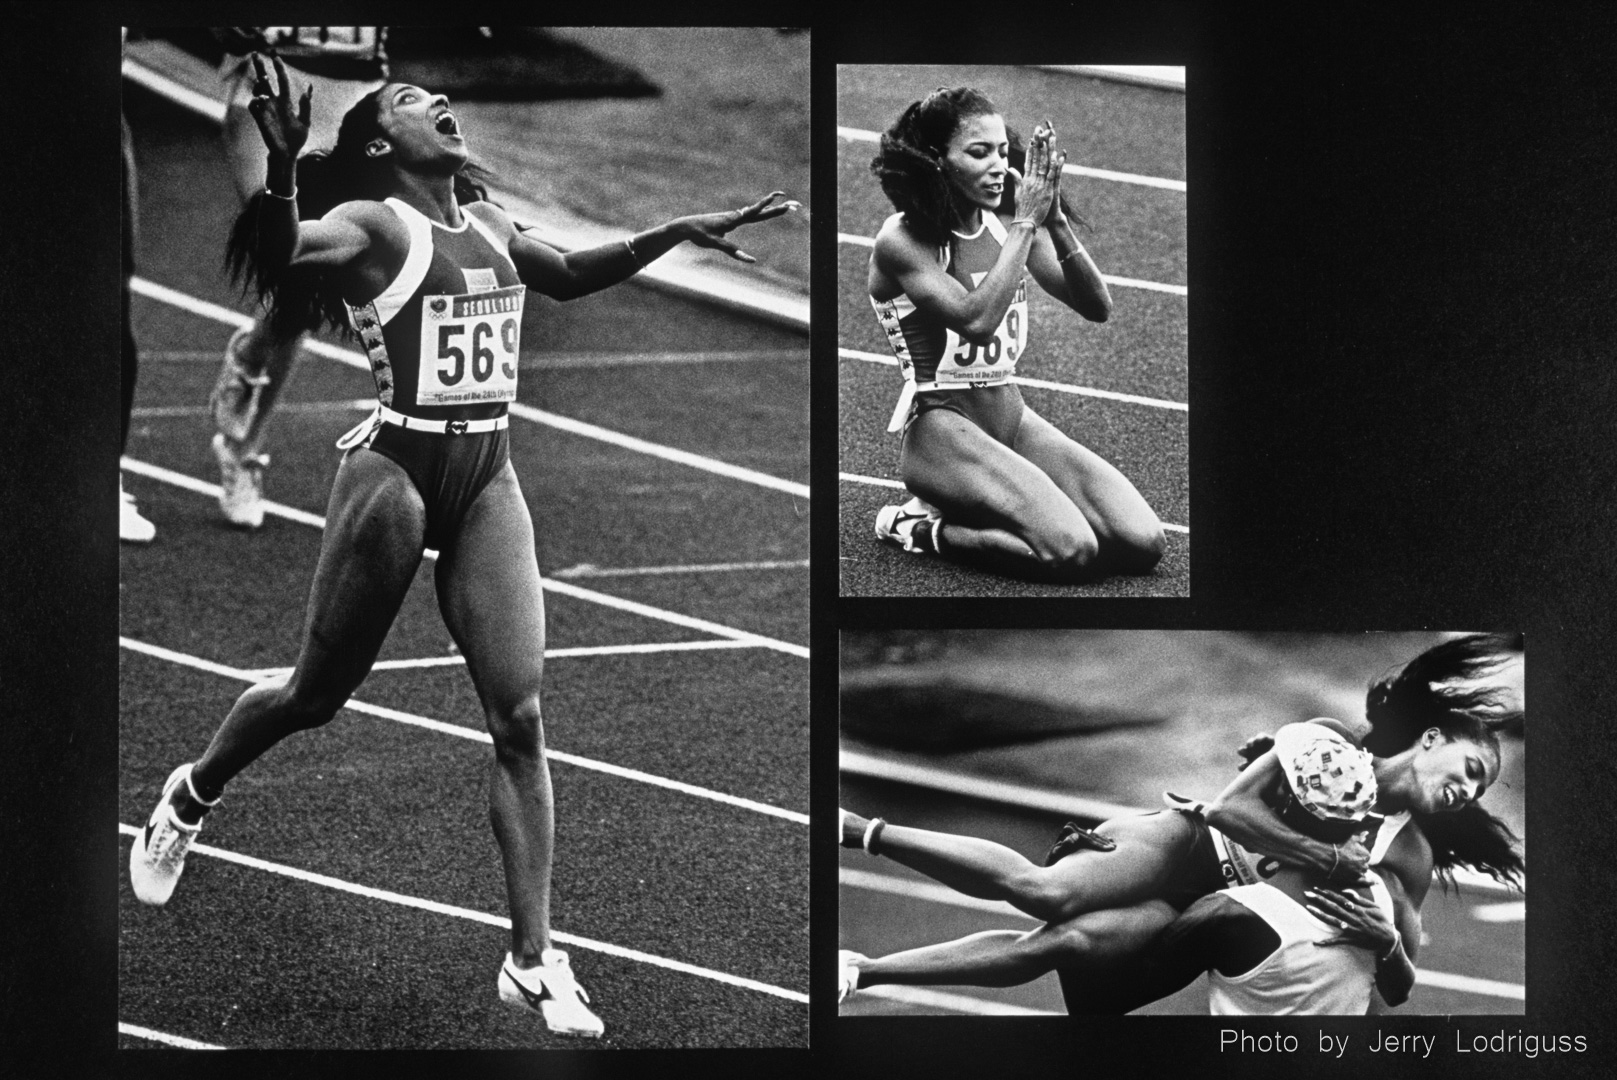 Florence Griffith Joyner reacts after seeing a world-record time posted on the scoreboard as she wins gold in the women's 200 meter finals. After dropping to her knees to pray, she was lifted by her husband, Al Joyner, and spun around. Joyner smashed world records in the 100 and 200 meter races, winning gold medals in both, as well as winning another gold as a member of the 400-meter relay team.